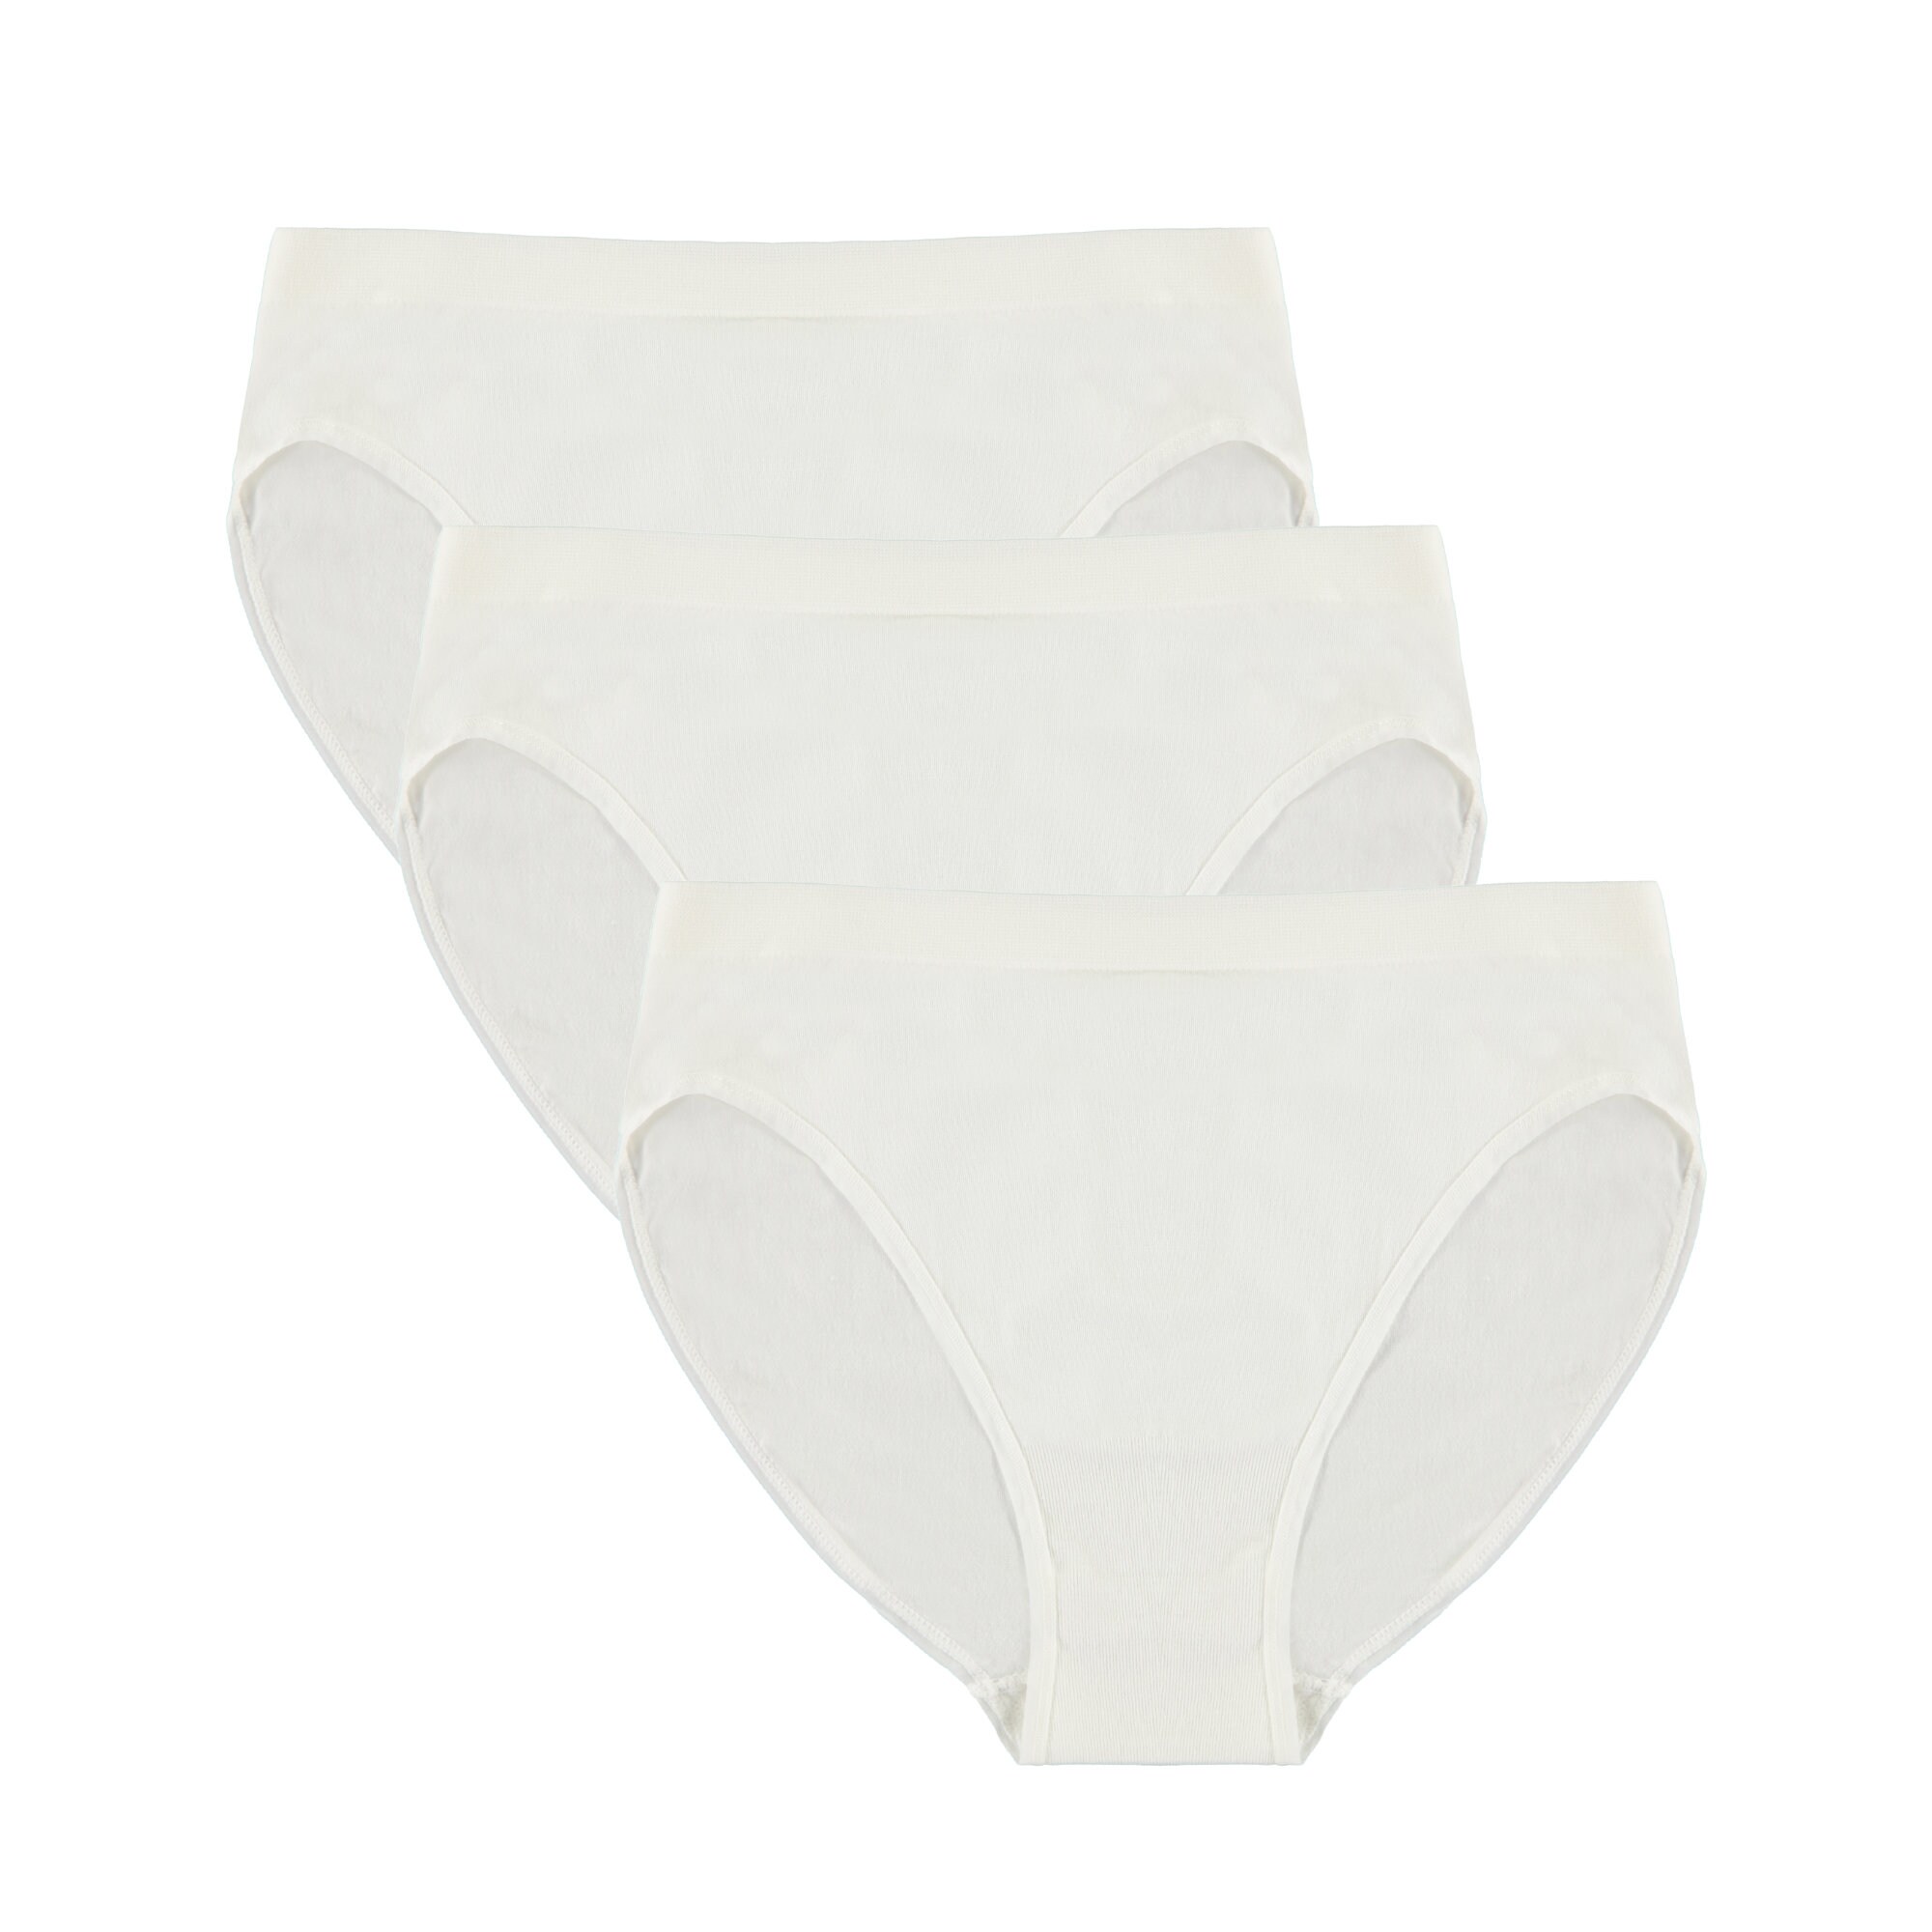 Buy Midrise Undies, Womens Lingerie, Elastic Free Panties, Natural Briefs,  Stretchy Comfortable Undies, Wide Band Underwear, Bamboo Organic Online in  India 